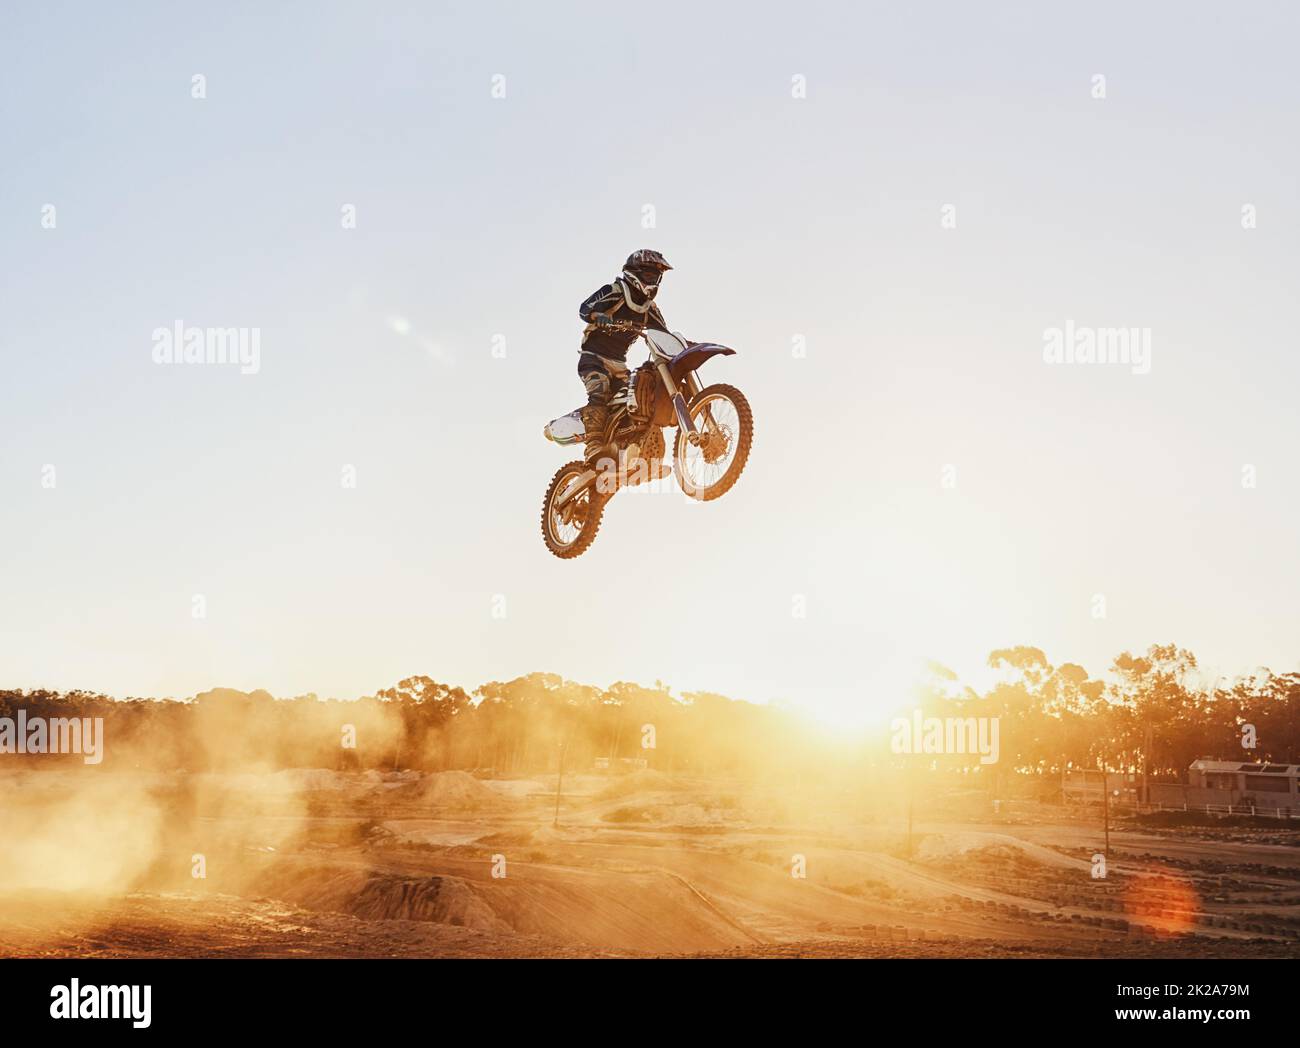 Hes flying through the air. A shot of a motocross rider in midair during a race. Stock Photo